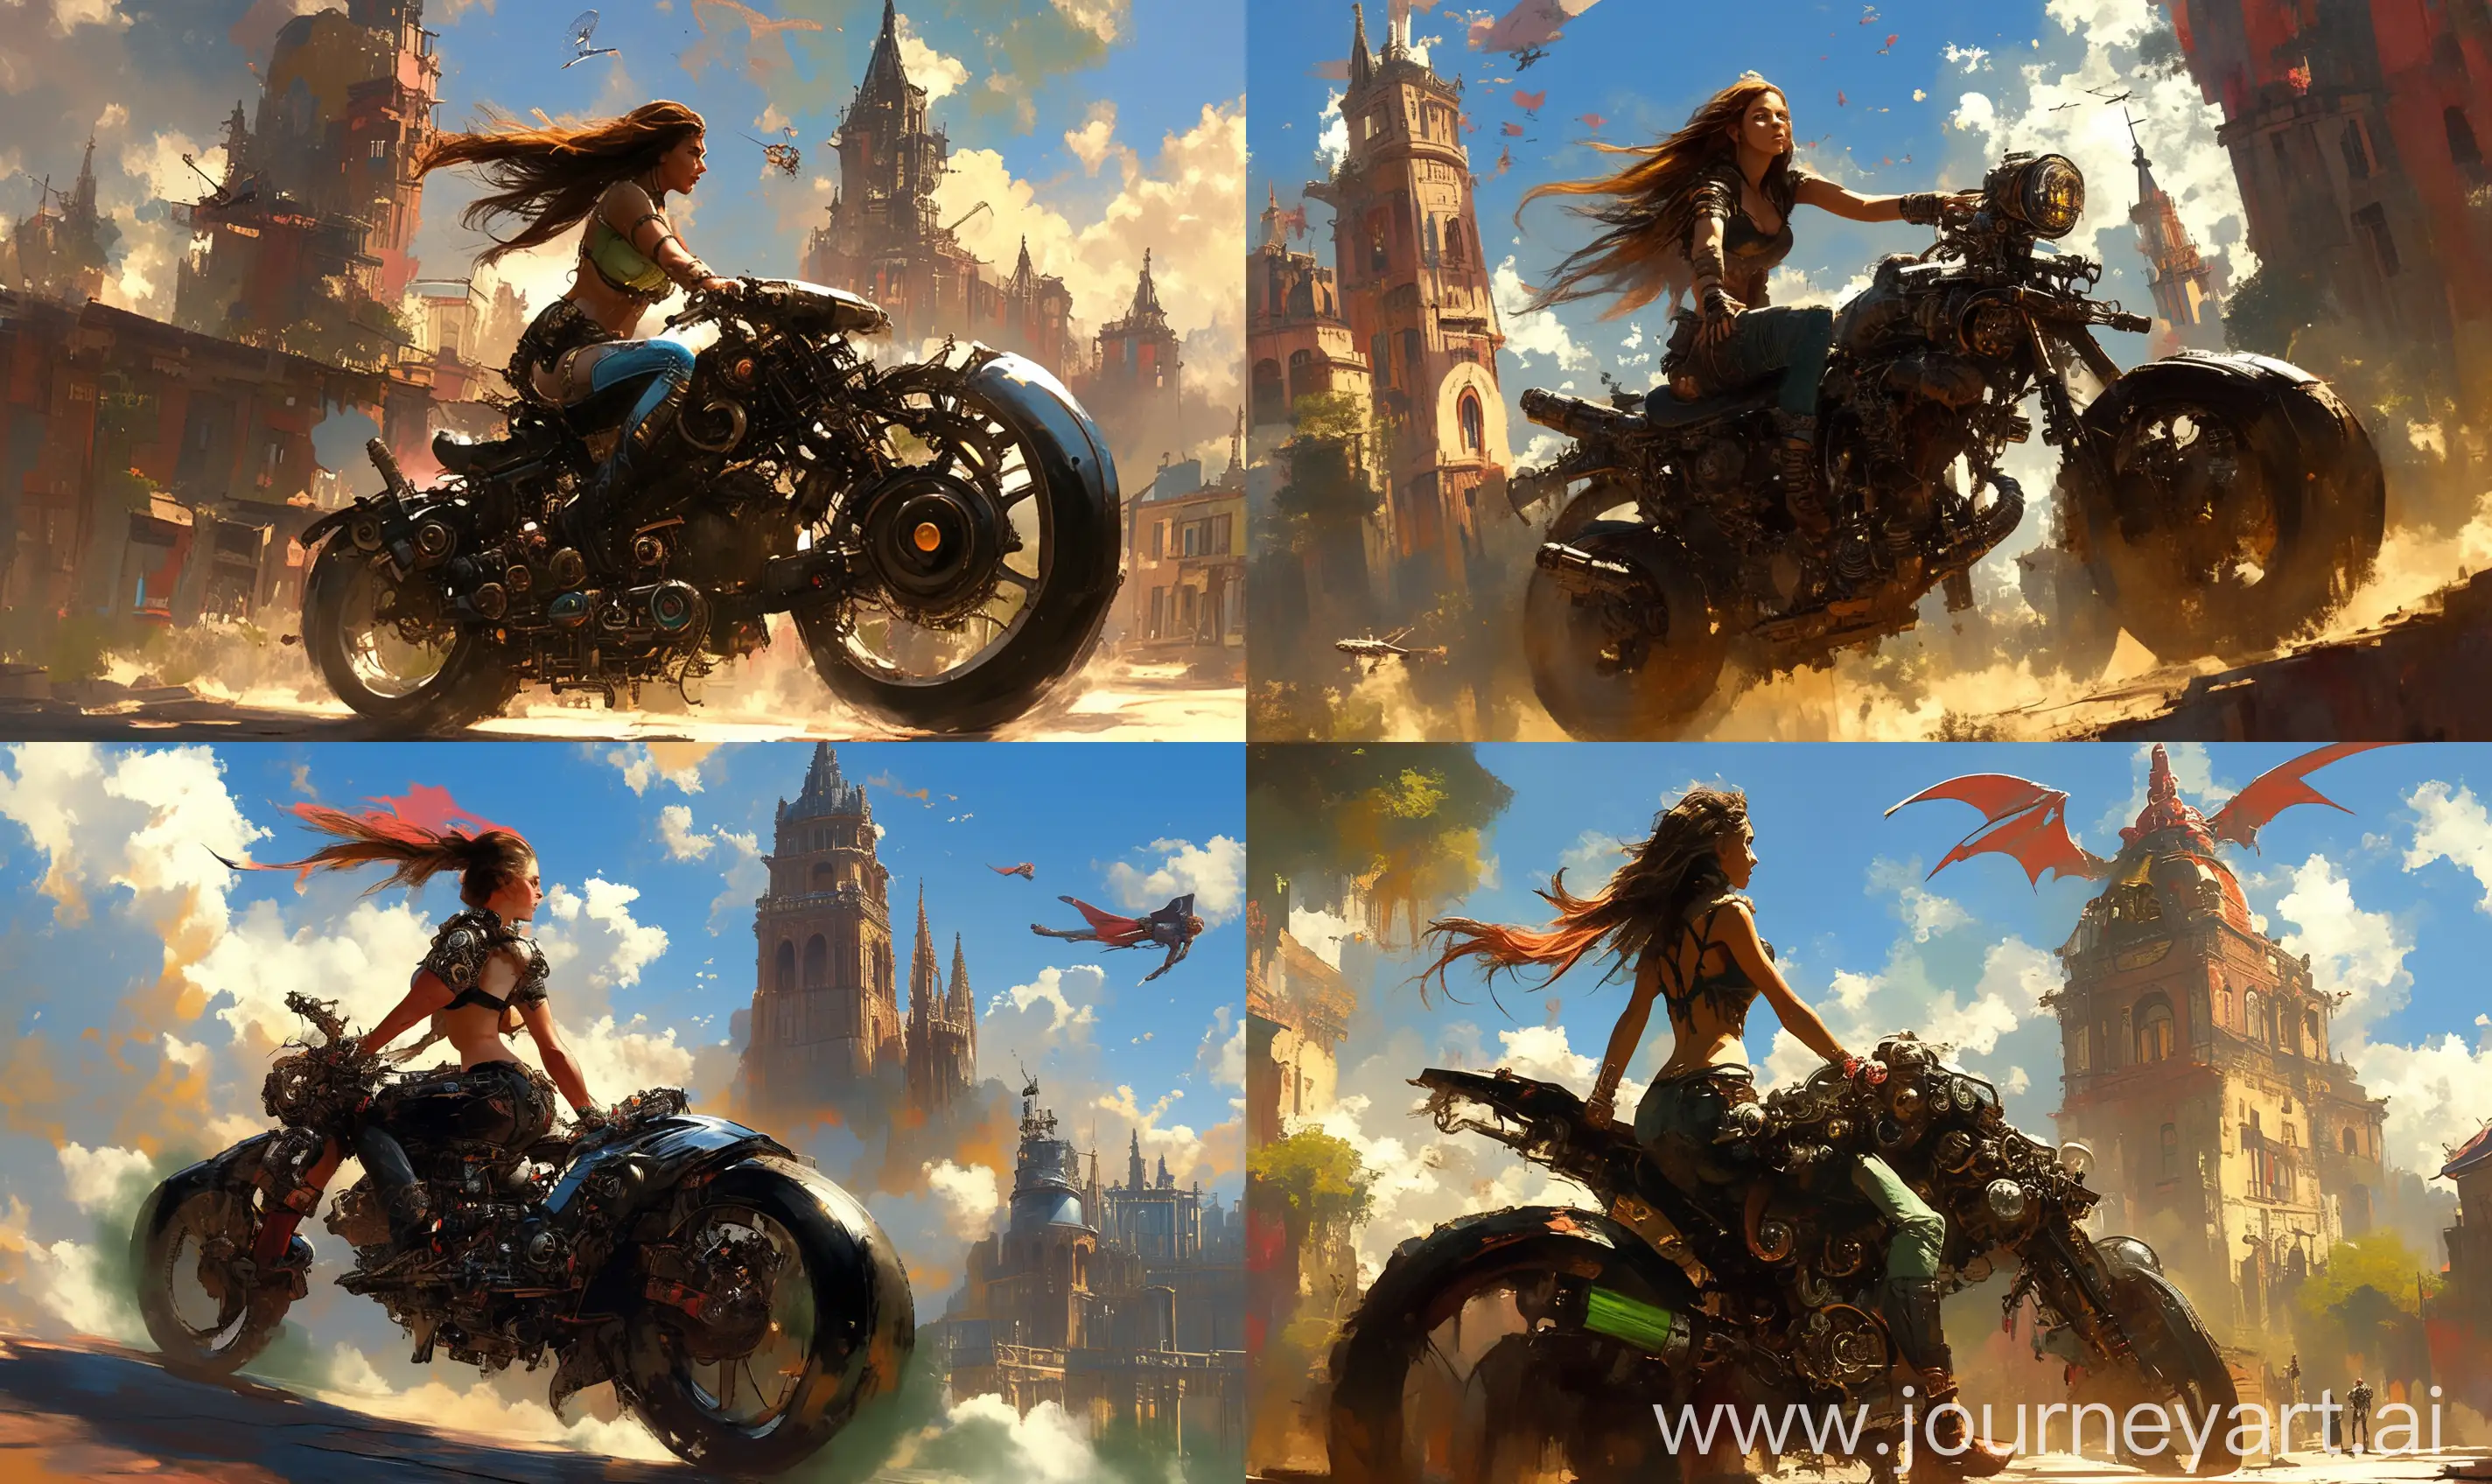 Futuristic-Steampunk-Amazon-Warrior-Riding-Motorcycle-Amidst-Victorian-Era-Streets-and-Magical-Mechanisms